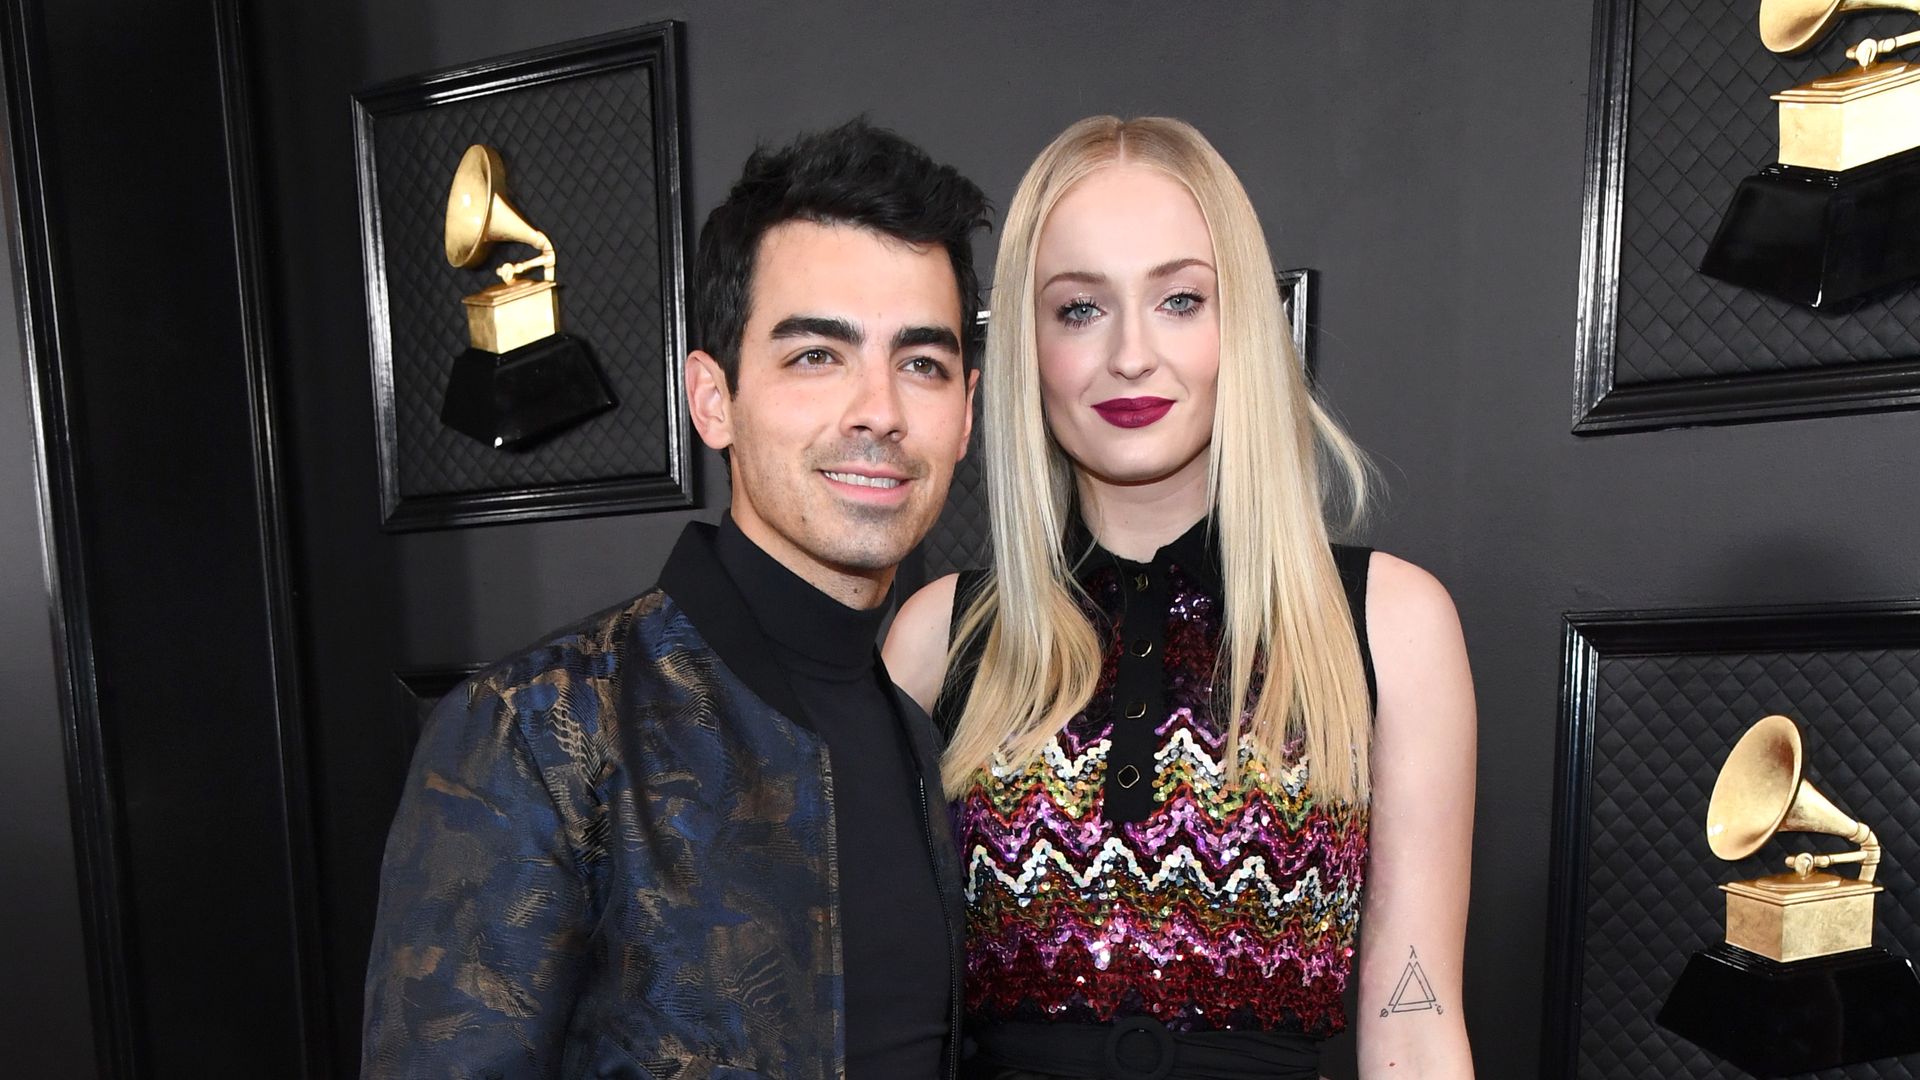 Joe Jonas and  Sophie Turner attend the 62nd Annual GRAMMY Awards at STAPLES Center on January 26, 2020 in Los Angeles, California